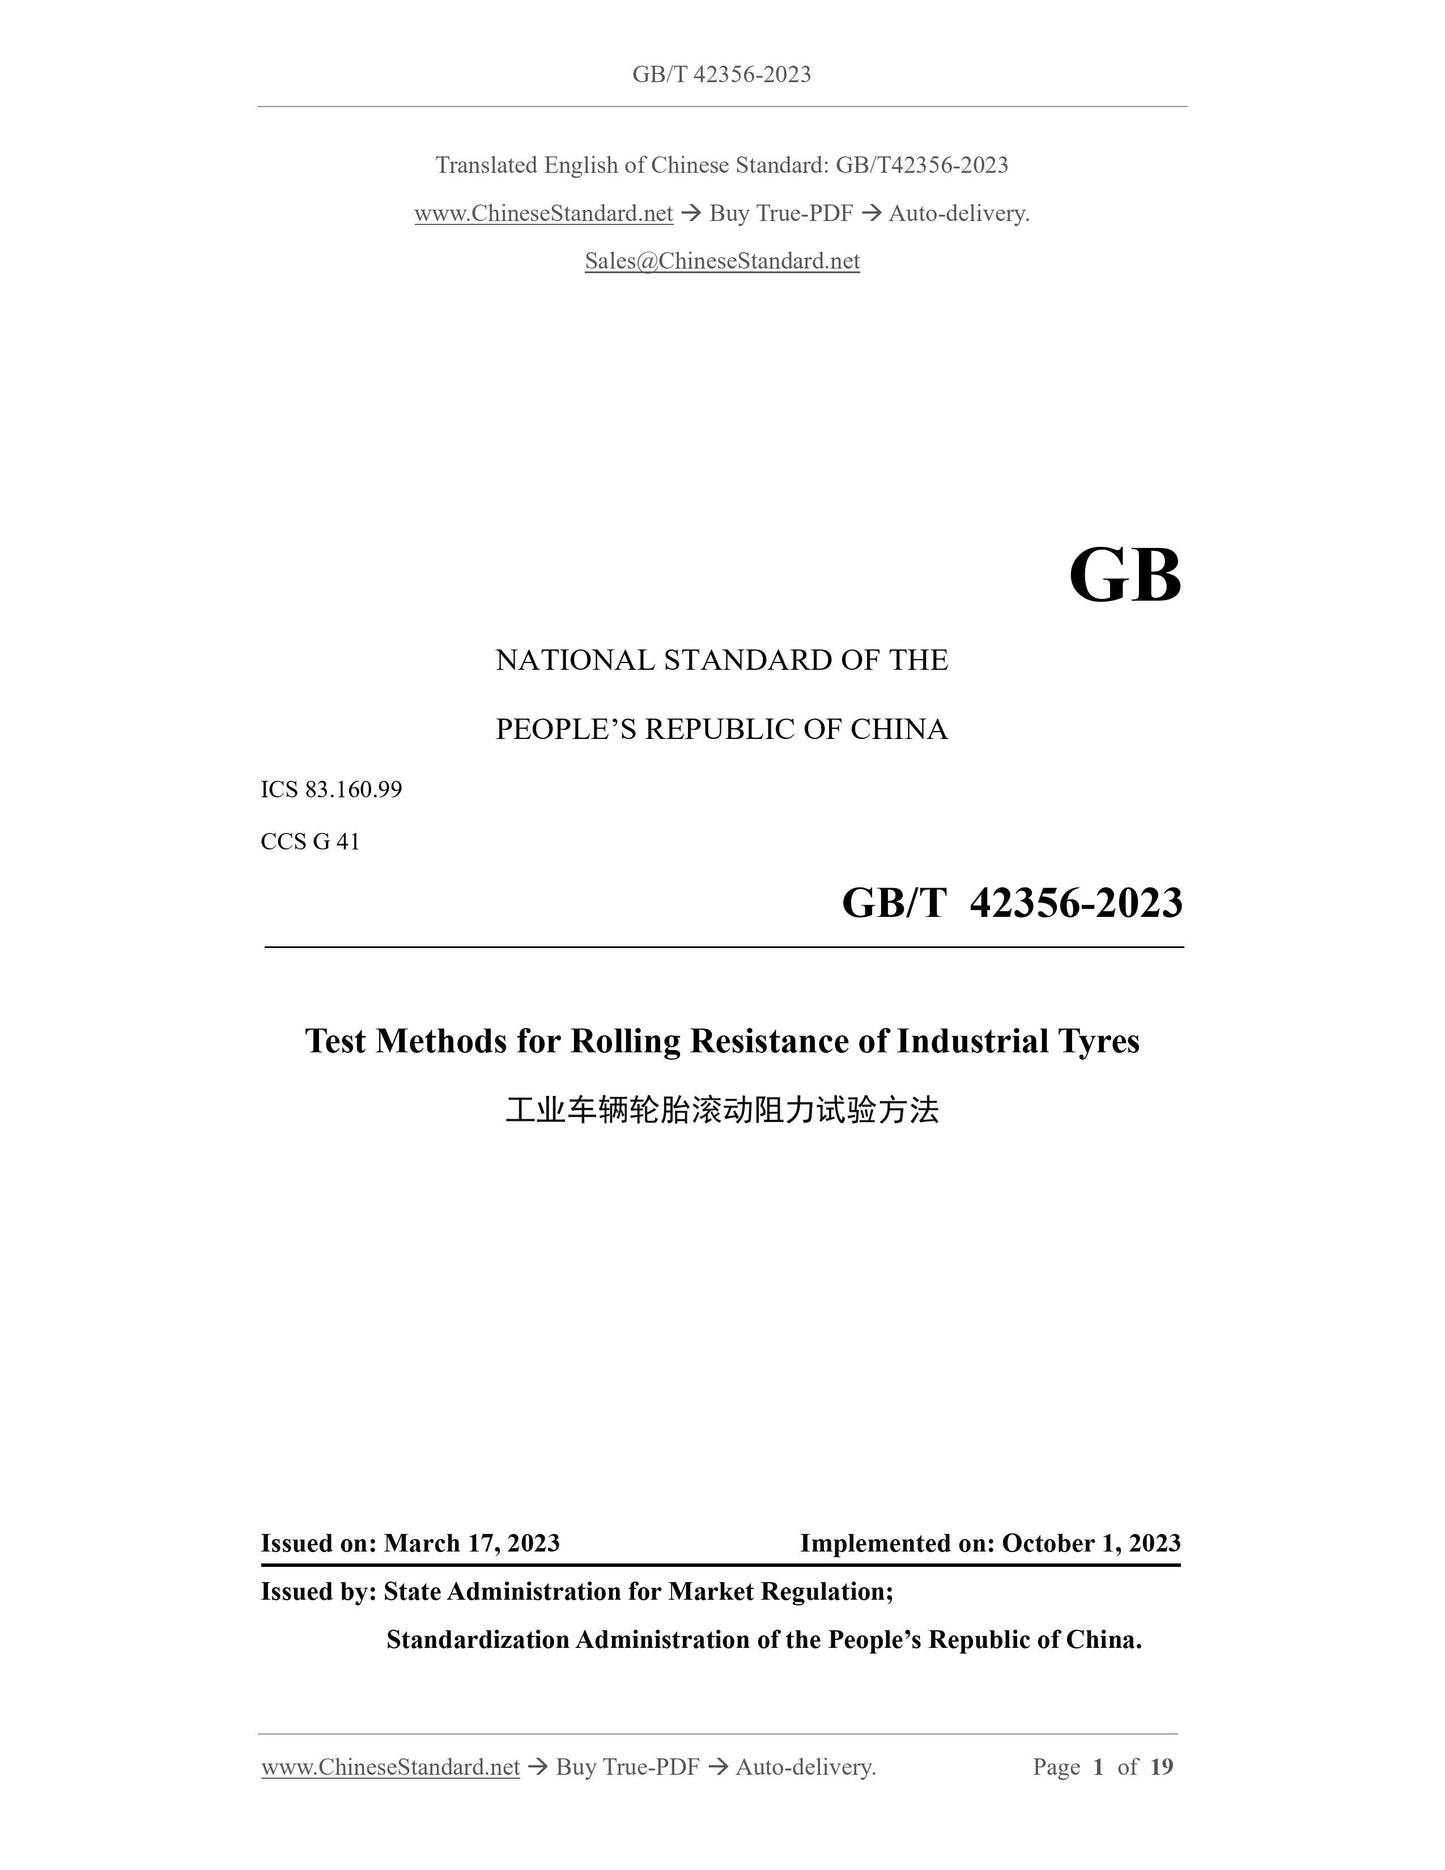 GB/T 42356-2023 Page 1